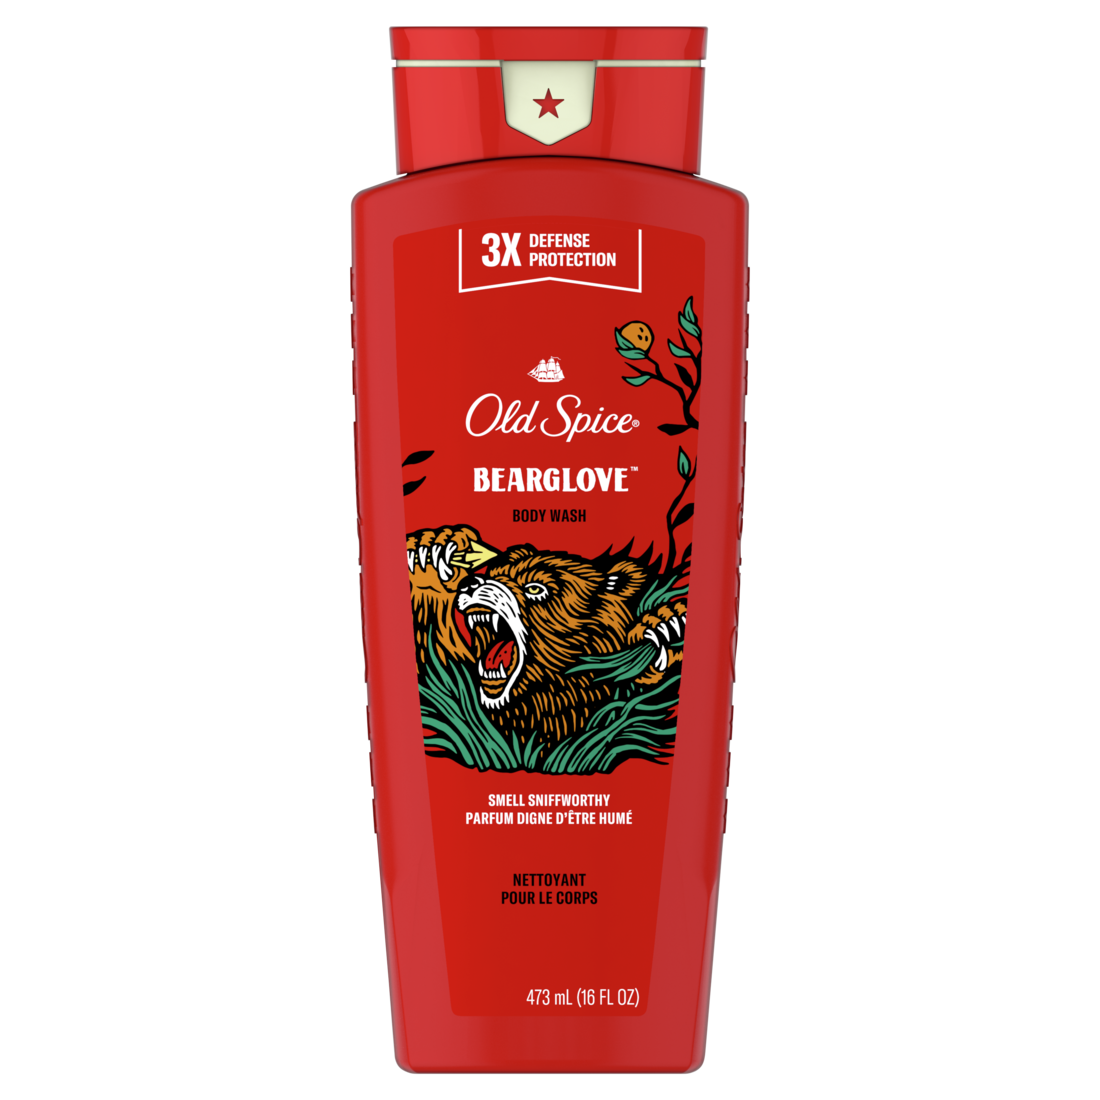 Old Spice Body Wash for Men Bearglove Long Lasting Lather - 16oz/473ml/6pk